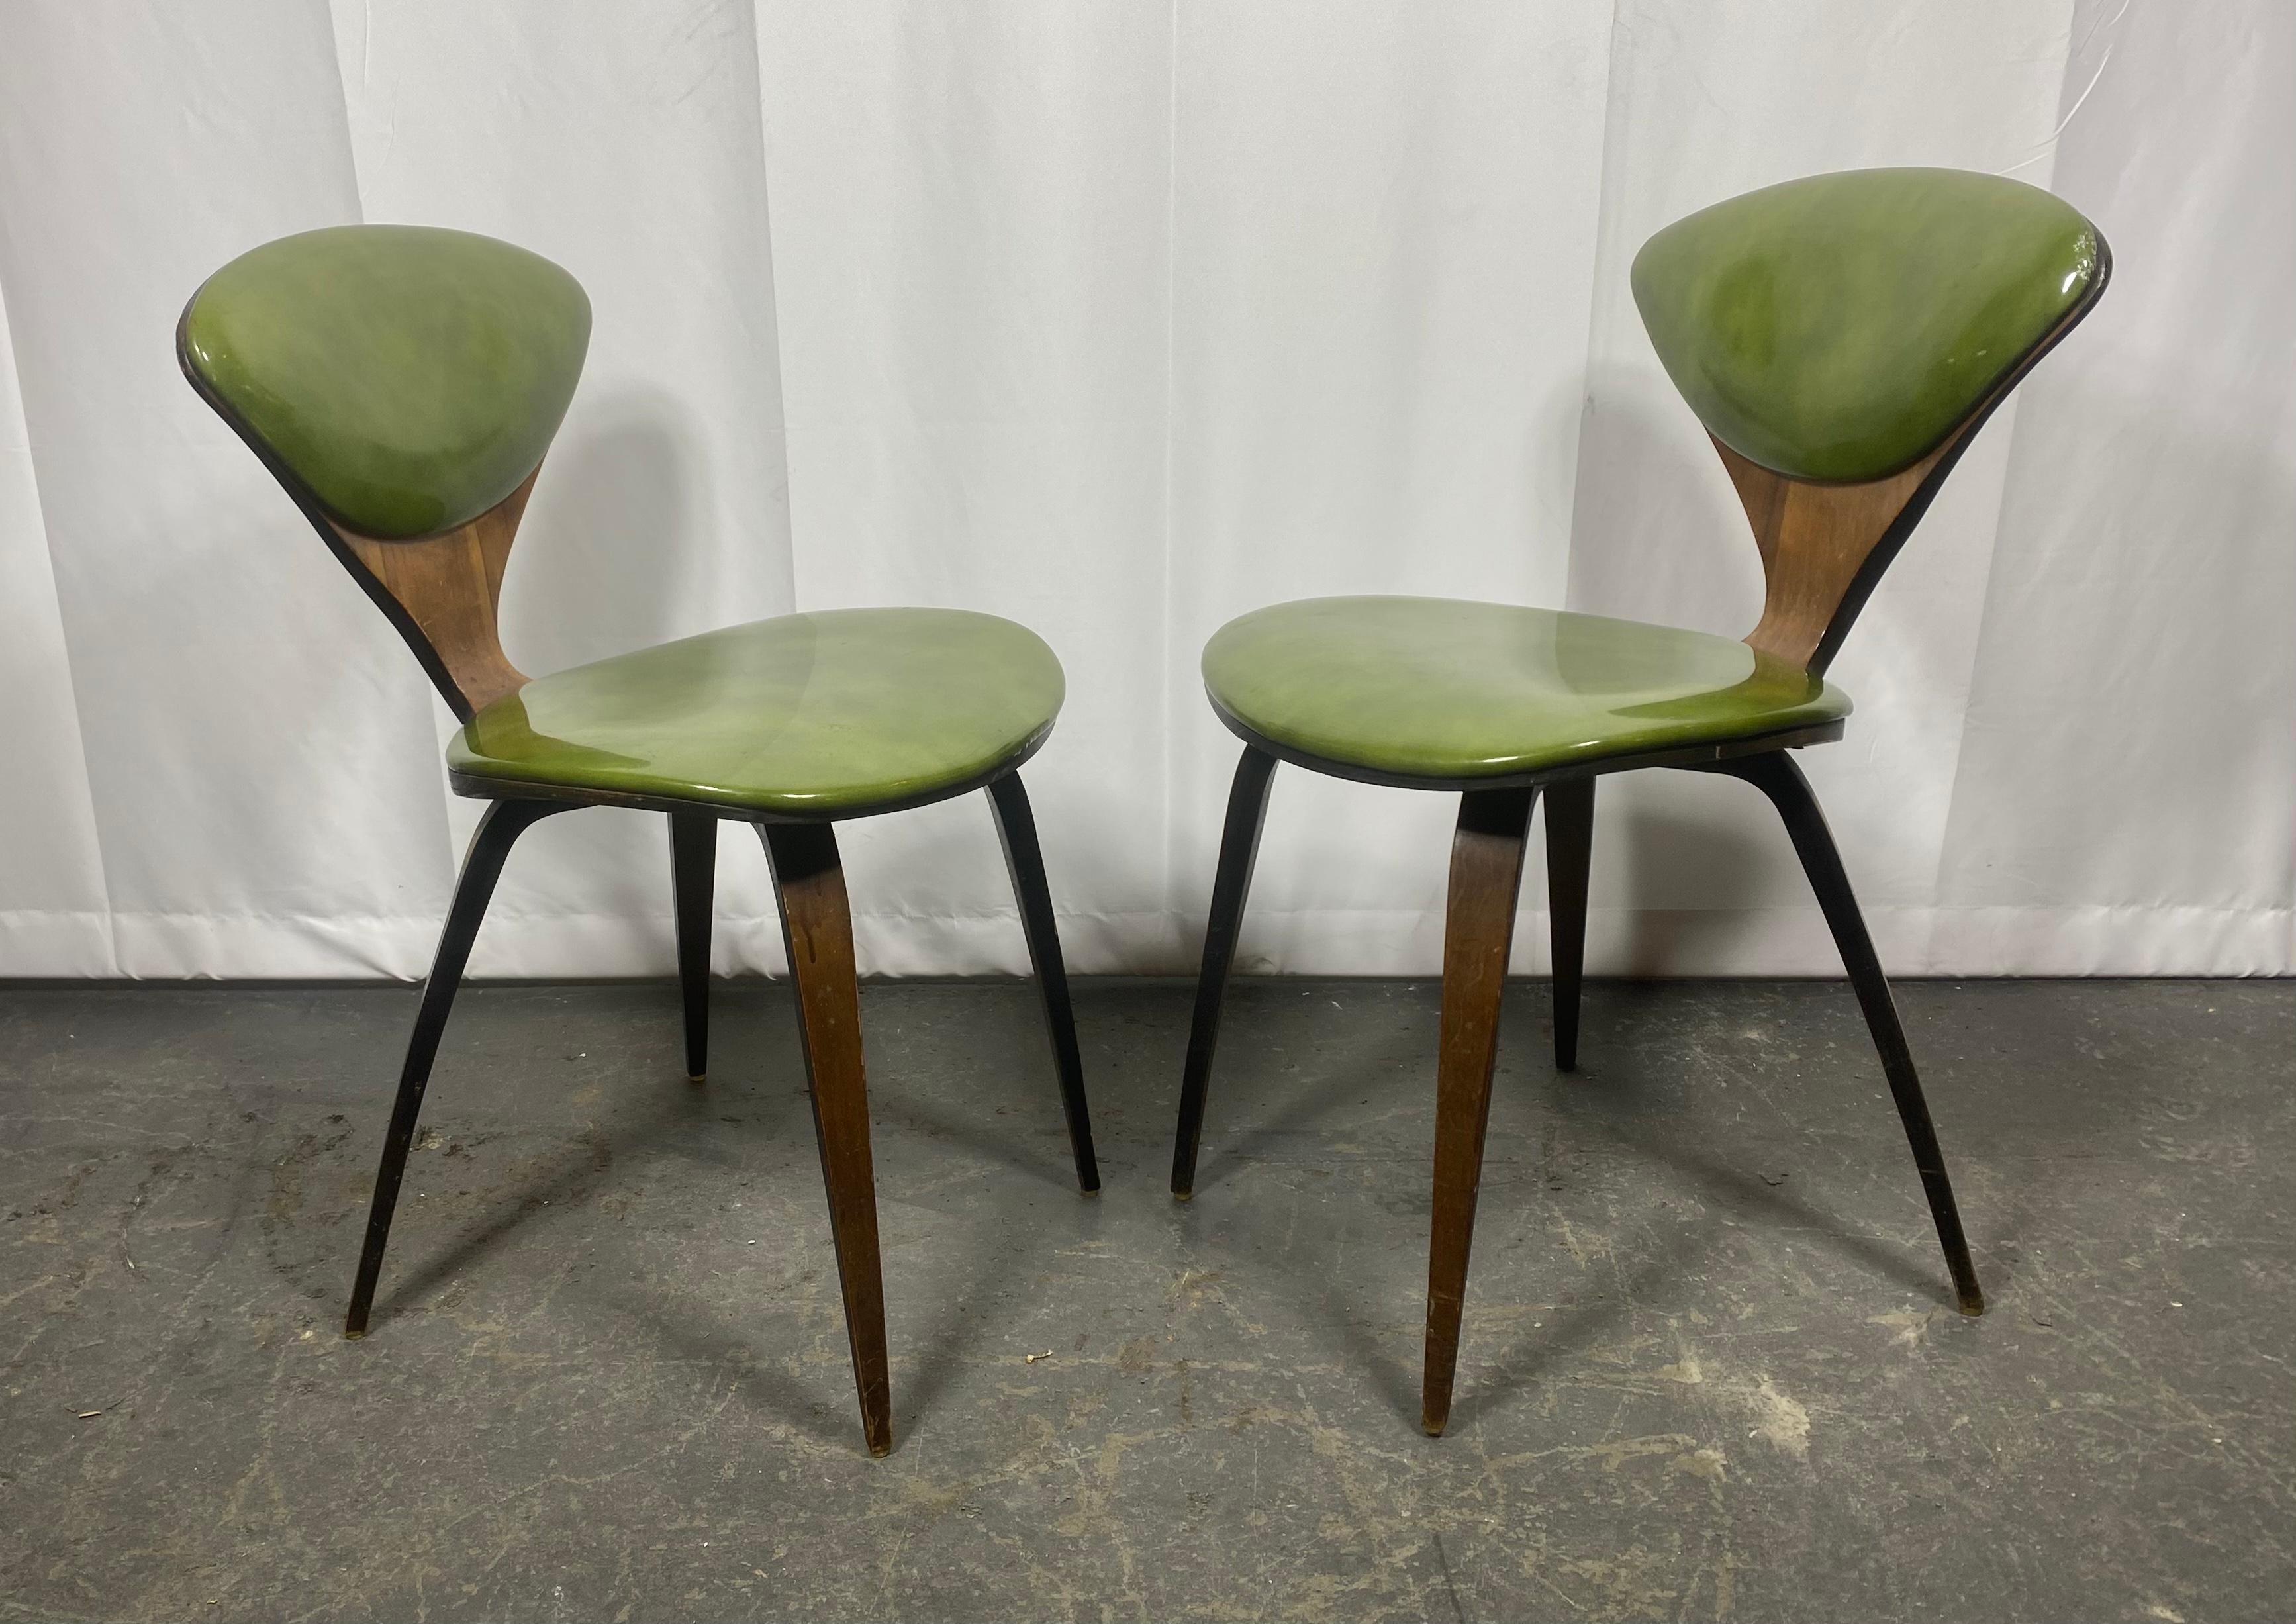 Early Norman Cherner dining / desk / side chair in patent leather Plycraft Inc.  In Good Condition For Sale In Buffalo, NY